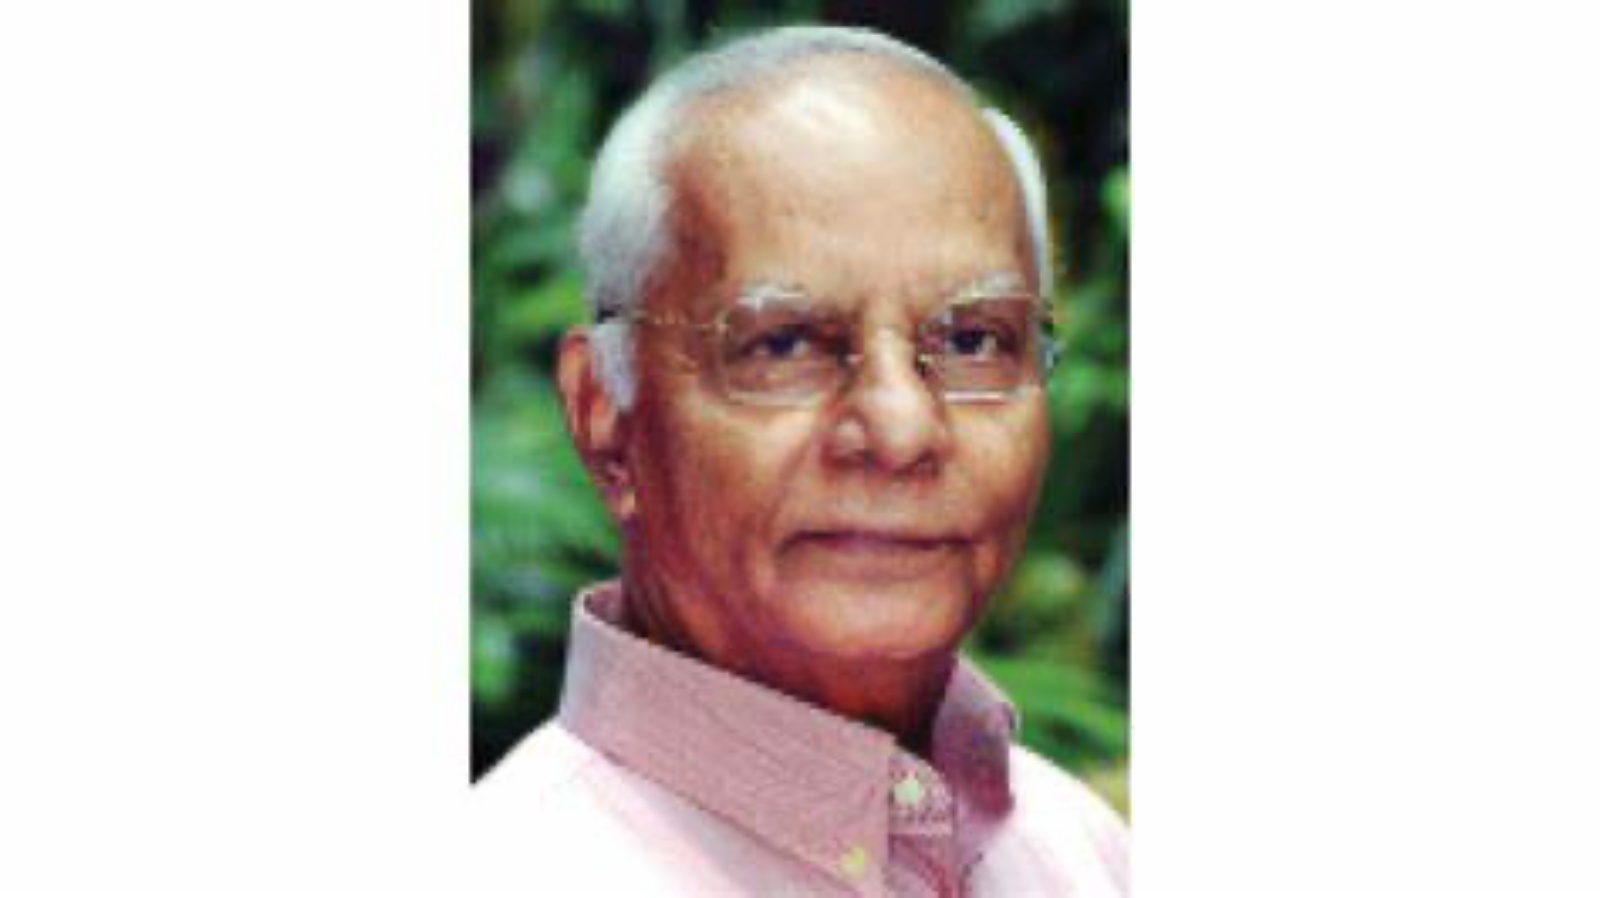 R N Kulkarni, born in 1940 in Savanur of Haveri district, was a graduate of Karnataka University in Dharwad. He started working with the IB in 1963 and served in several positions in the next three decades before retiring in 1998.